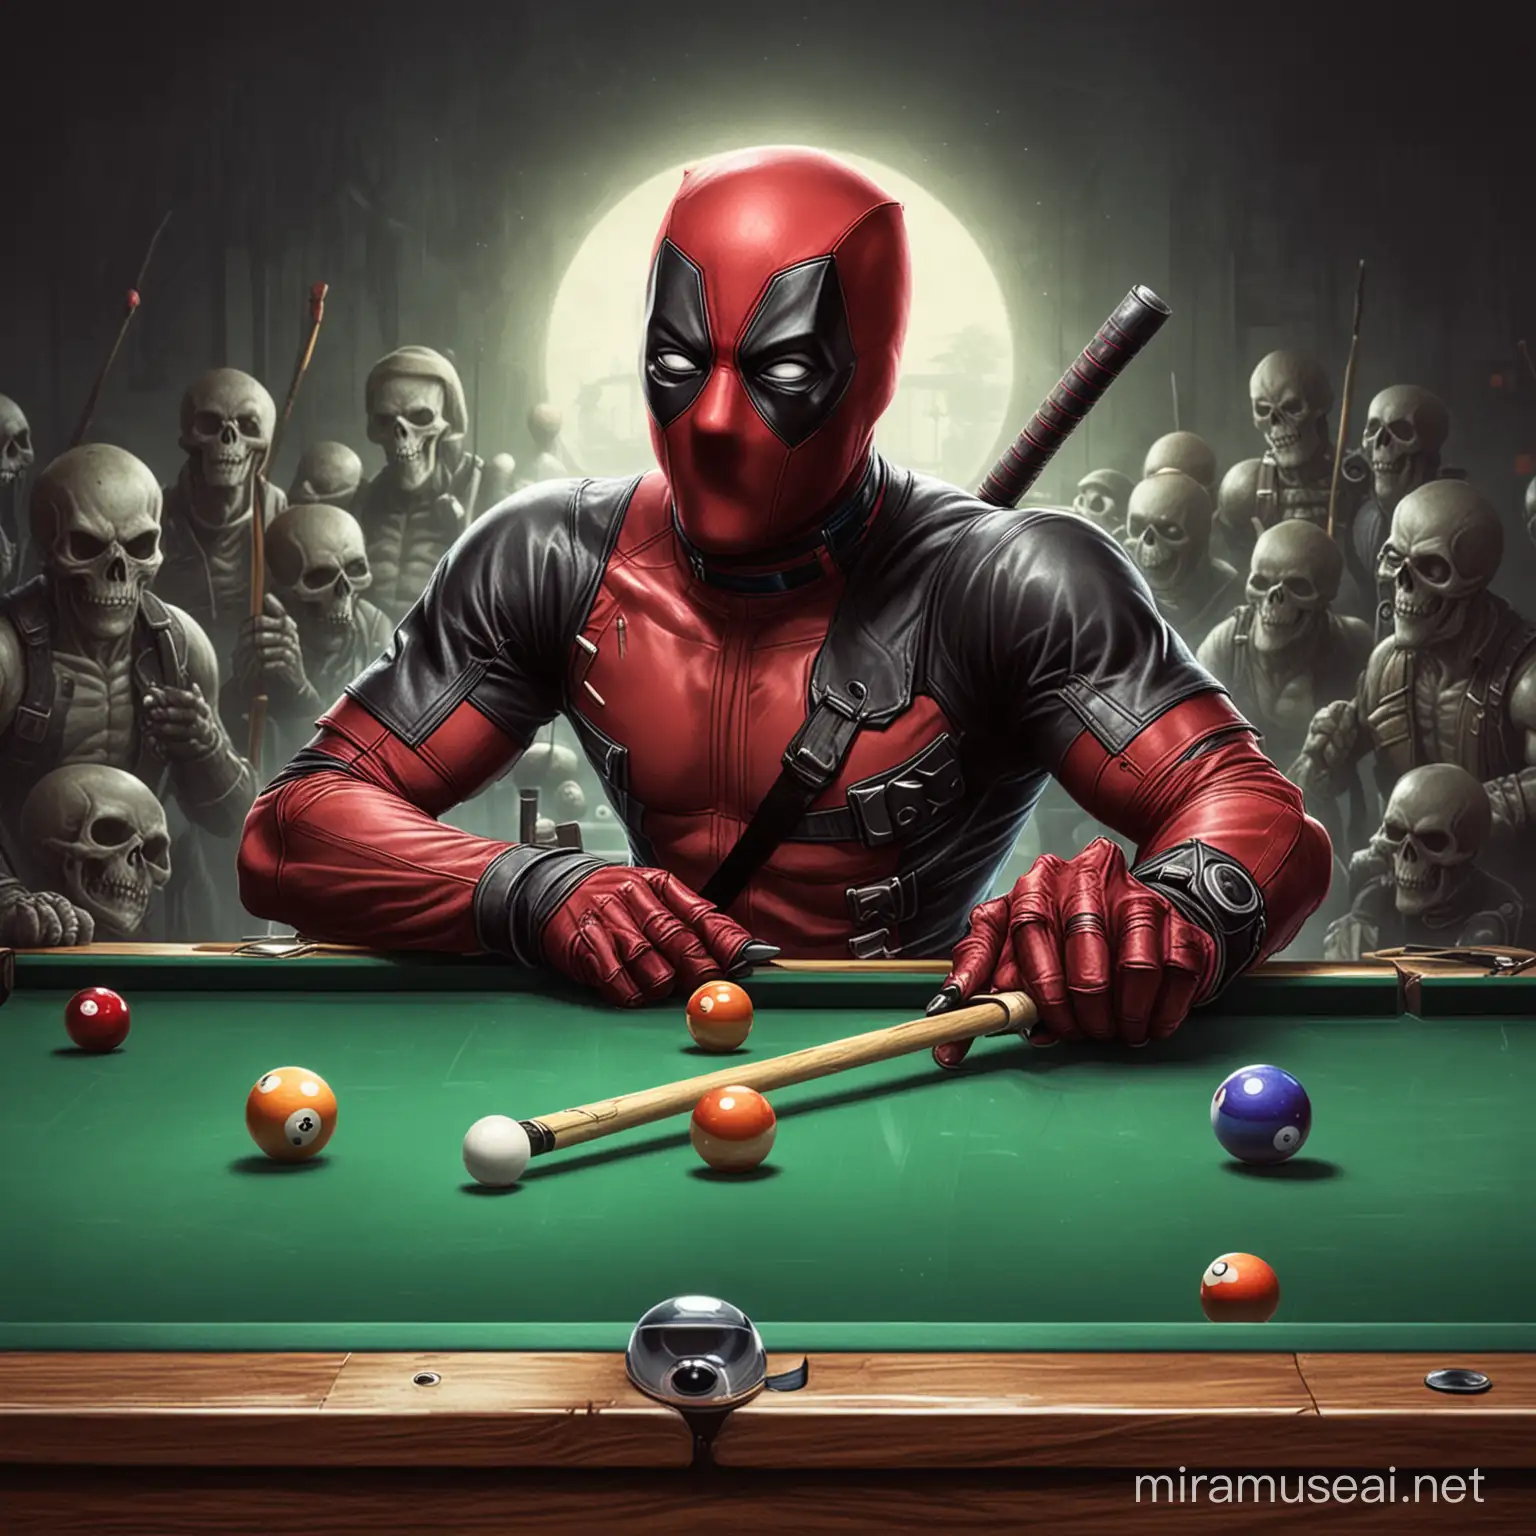 For a tee shirt logo, have deadpool playing billiards, have the image framed
, replace pool balls with skulls
